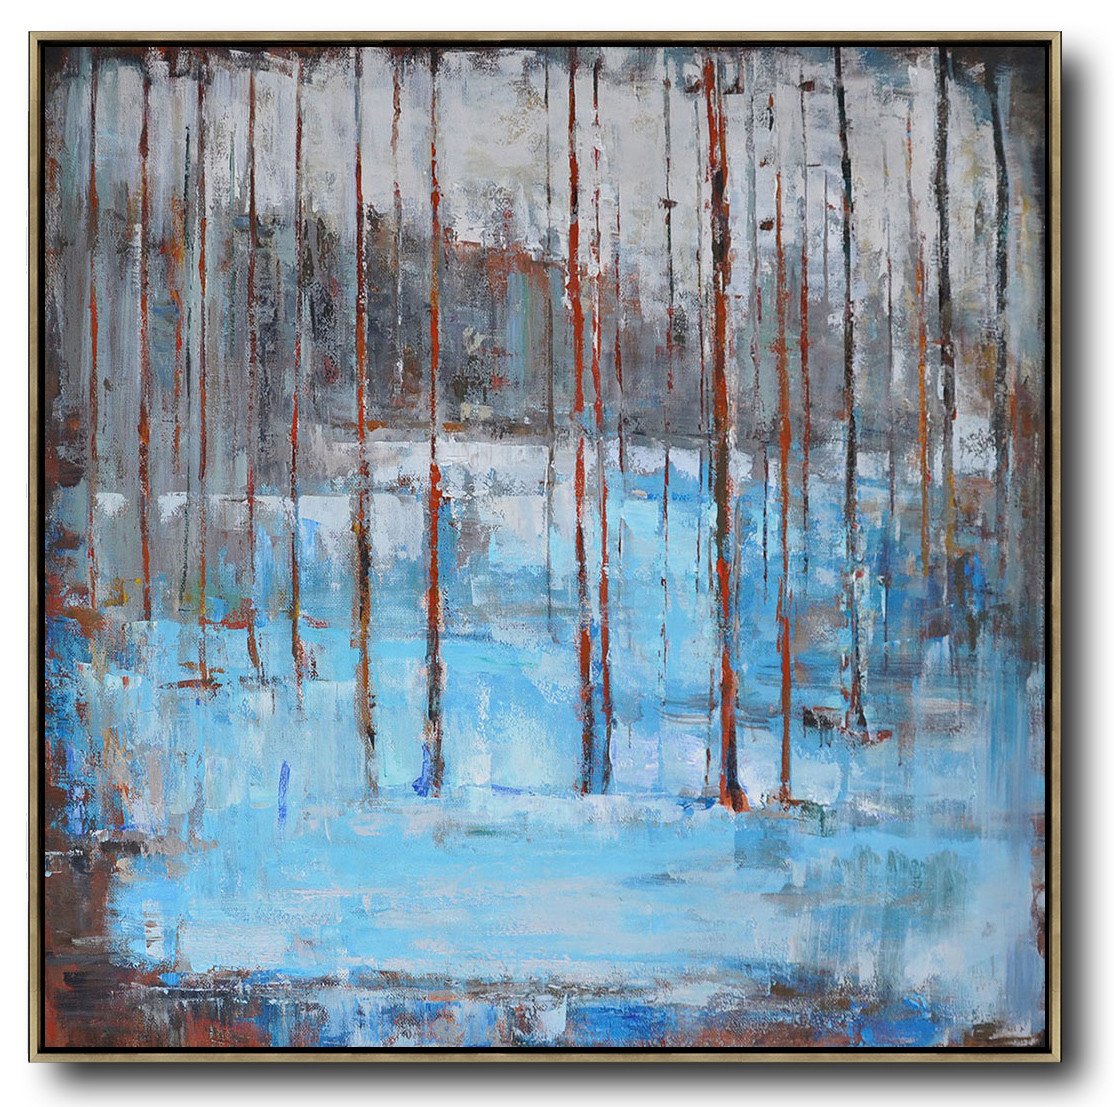 Hand-painted oversized Abstract Landscape Oil Painting by Jackson fine art sculpture